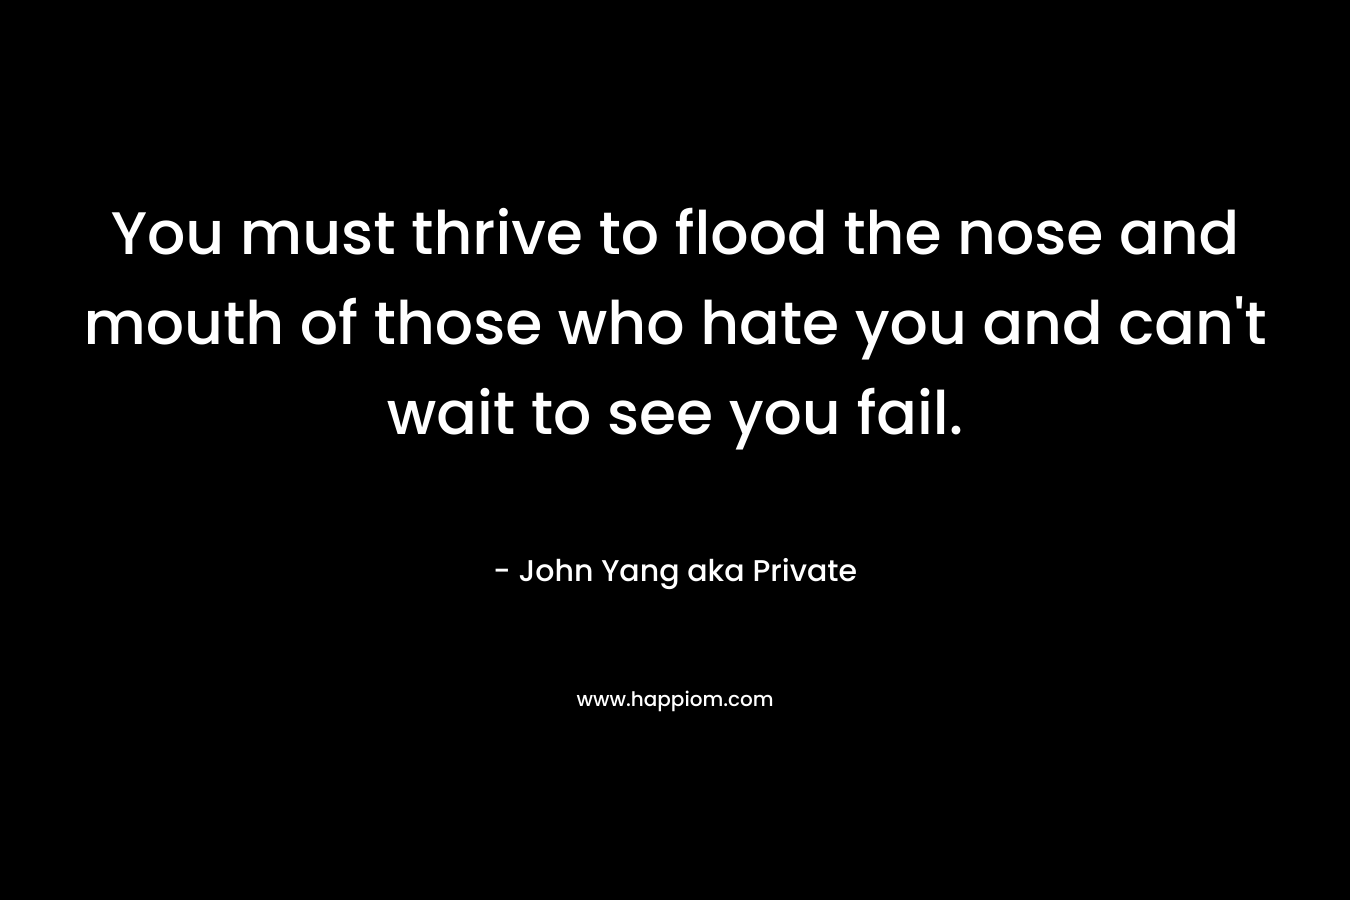 You must thrive to flood the nose and mouth of those who hate you and can’t wait to see you fail. – John Yang aka Private